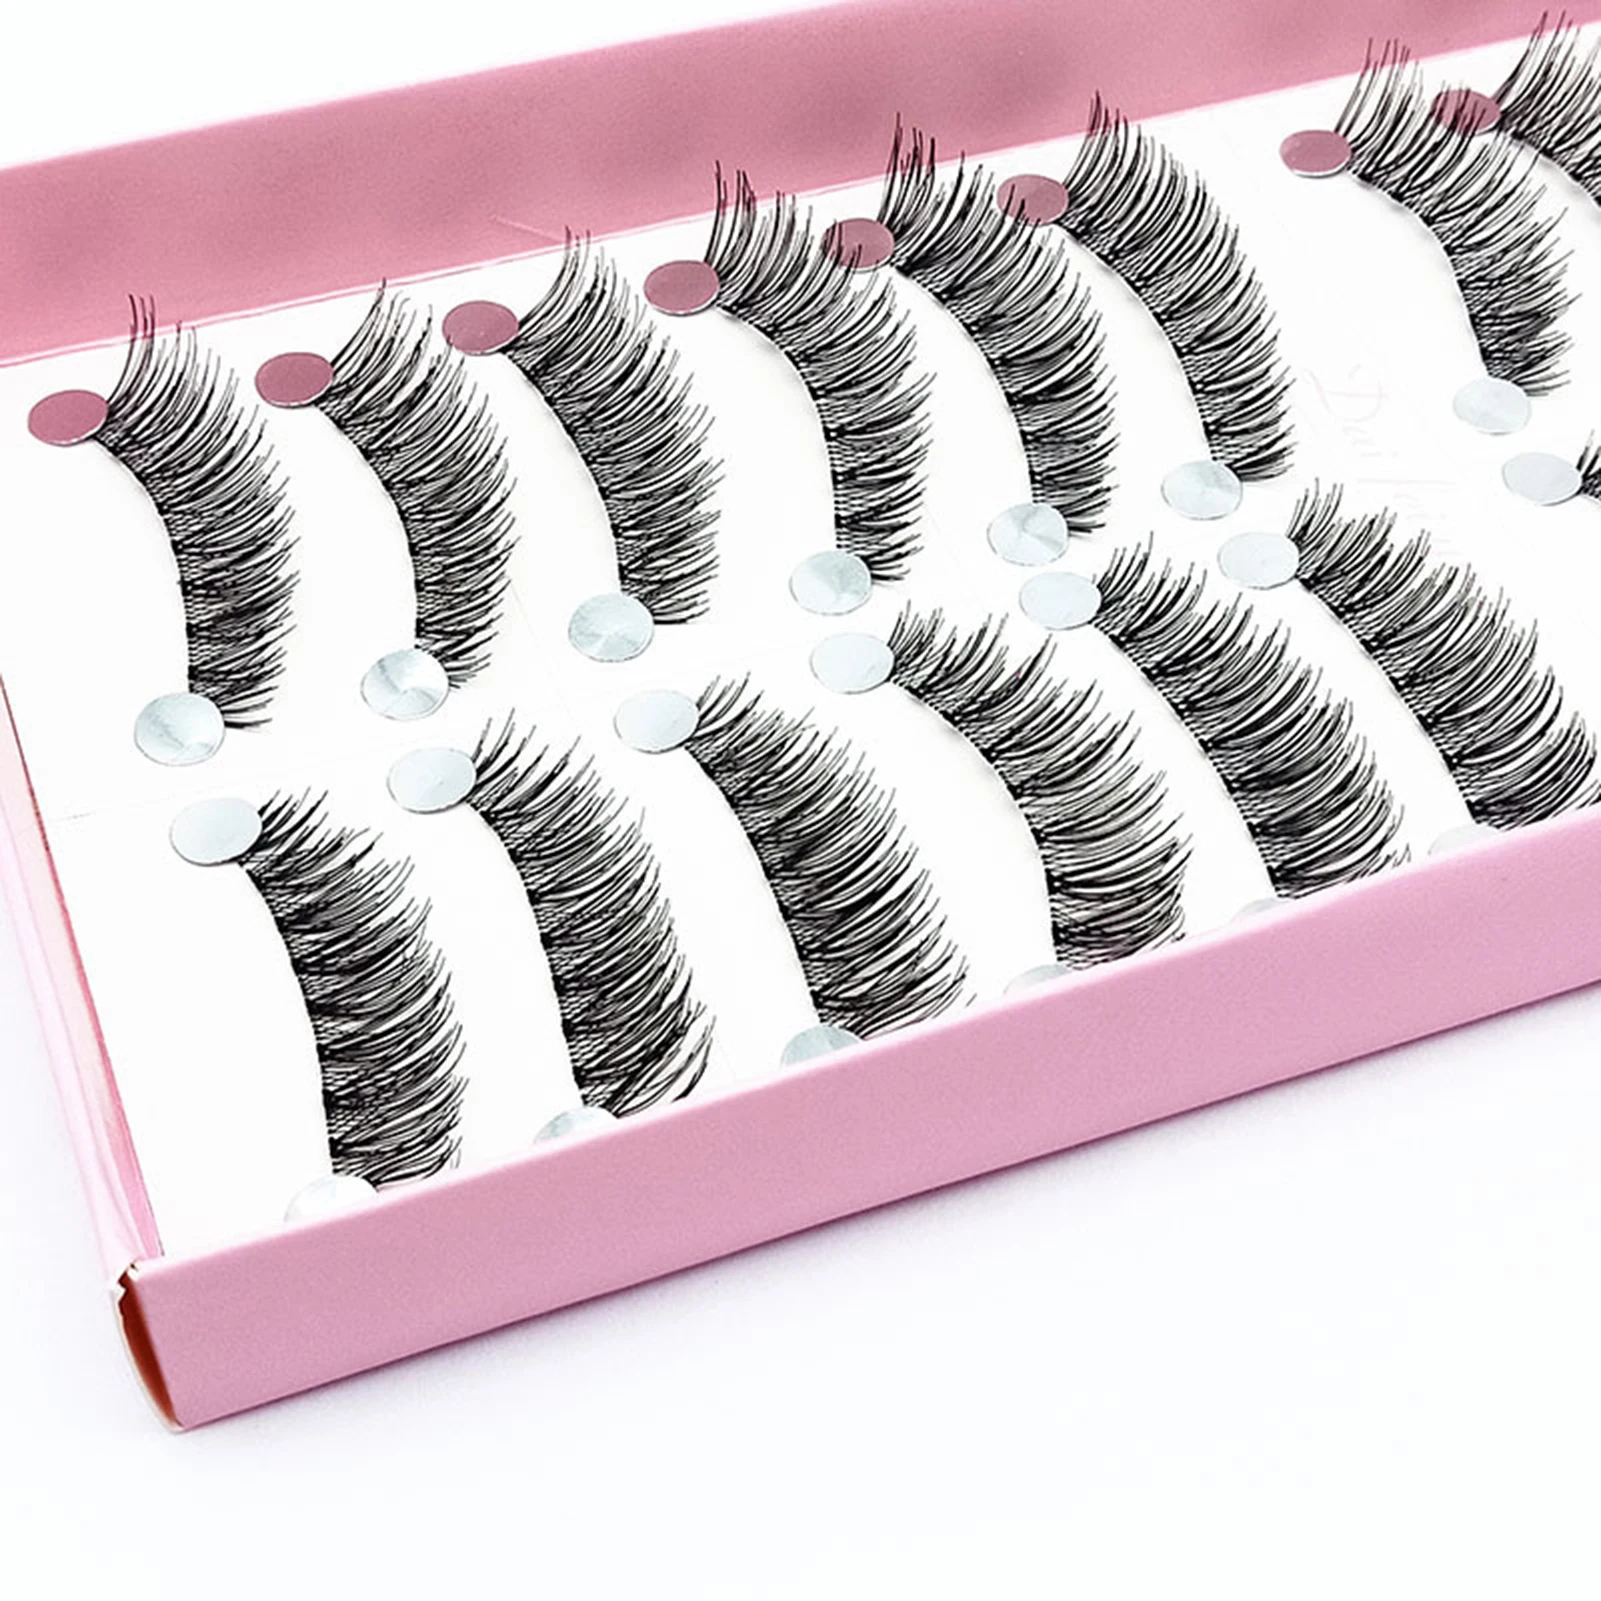 

10 Pairs Curly Soft False Eyelashes Eyes Looking Bigger Brighter Fuller for Party Cosplay Makeup Supplies